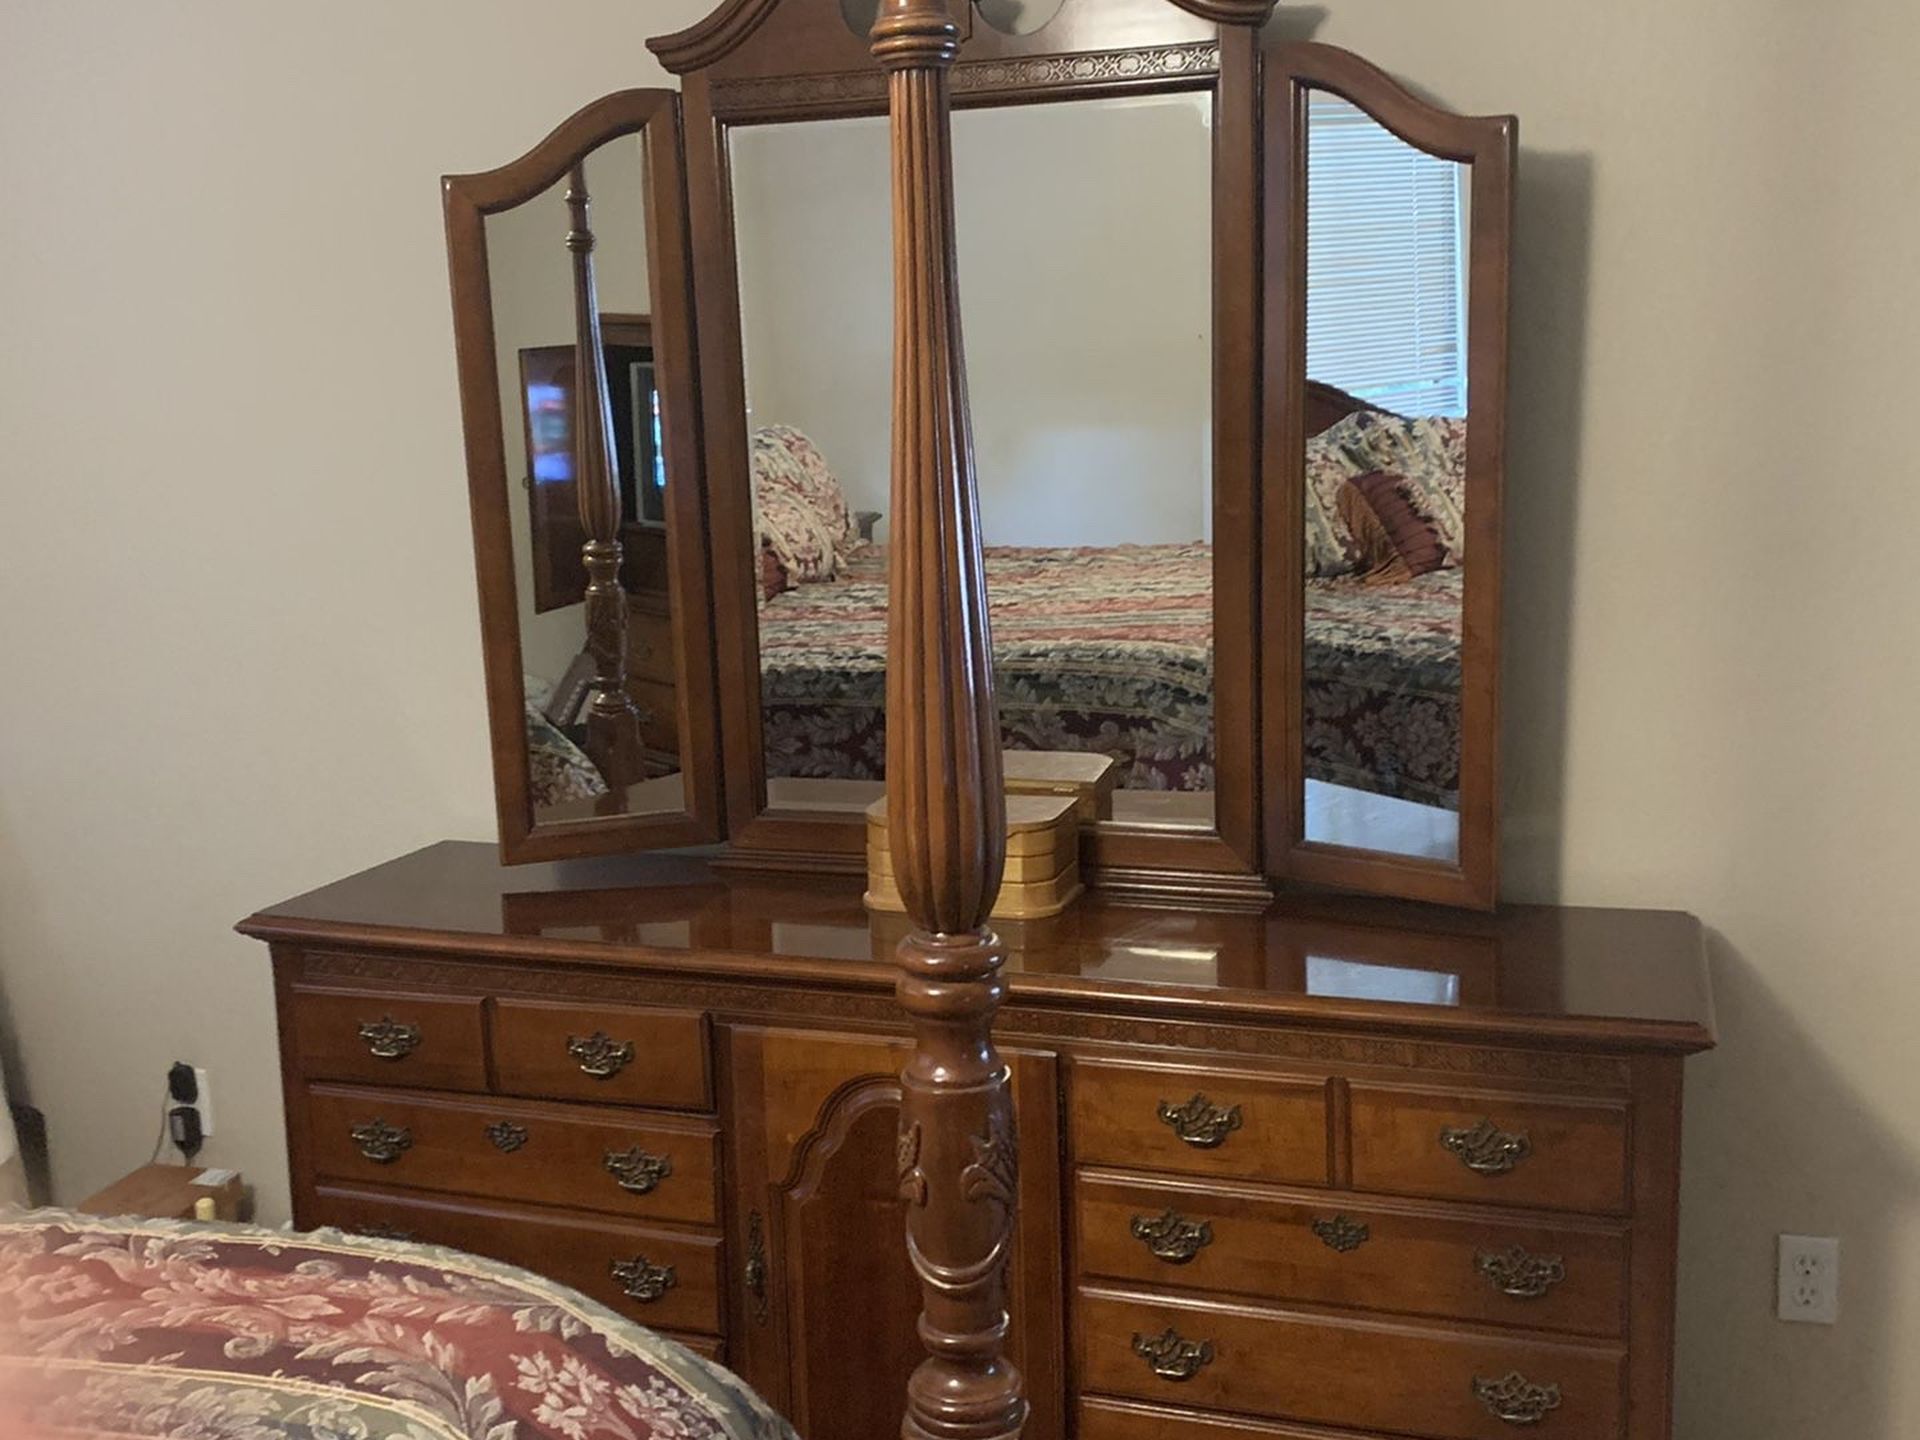 6 piece cherry bedroom set. 4 poster bed, 2 nightstands, 1 large dresser with mirror, 1 tv cabinet with large drawers, and lingerie chest.